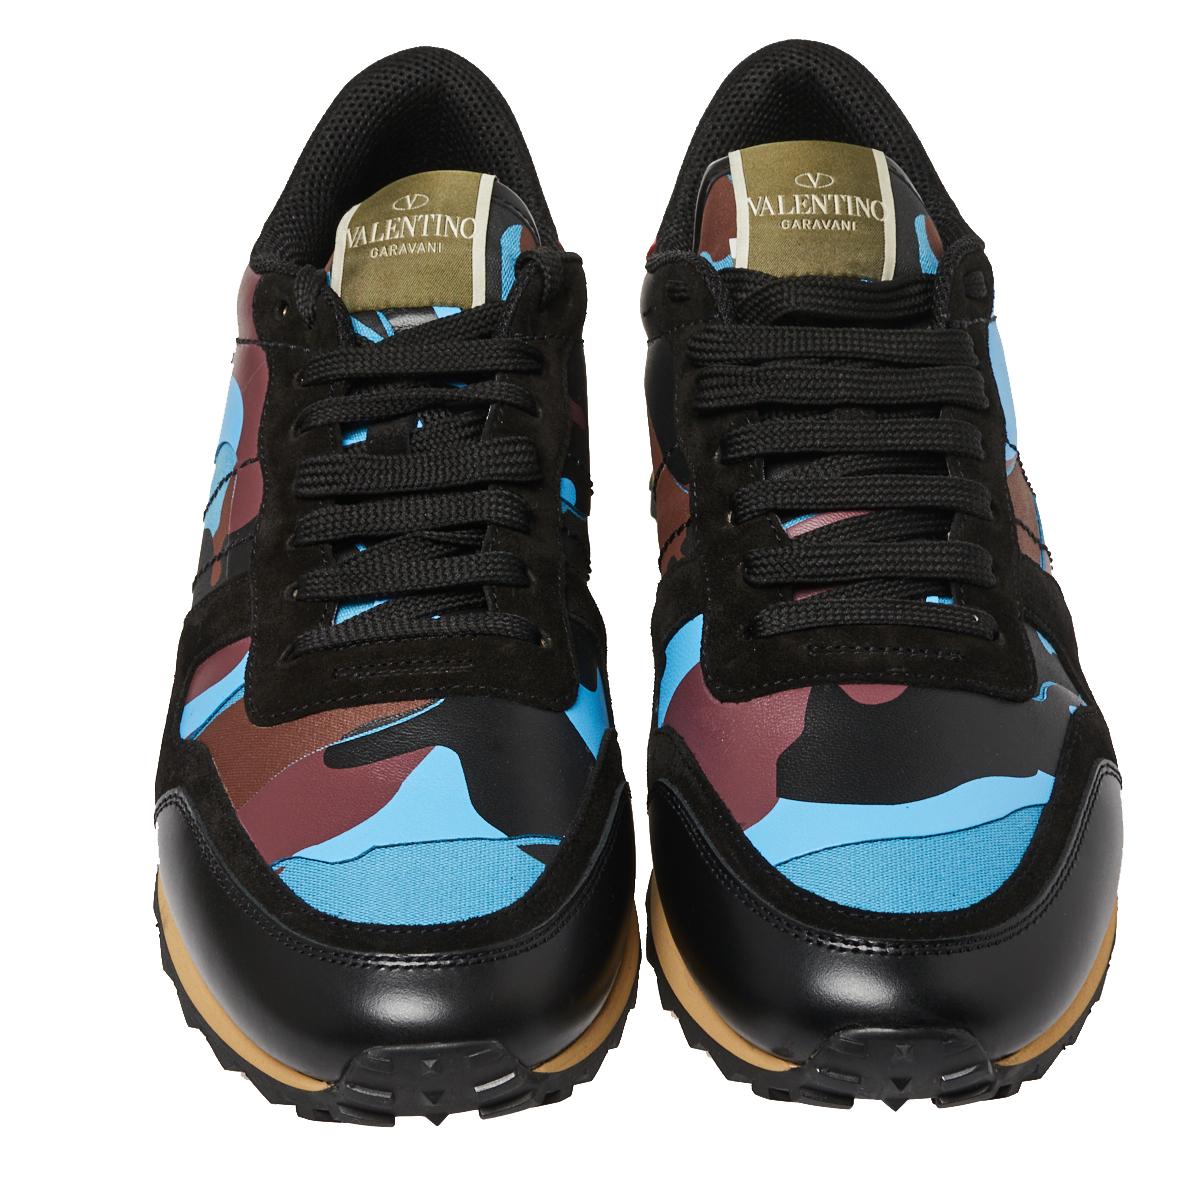 These multicolor Rockrunner sneakers from Valentino are made for the ones who want to stand out. Crafted from fine fabric and leather, these come in a camouflage design with laces on the vamps. They have Rockstud detailing on the counters and tough